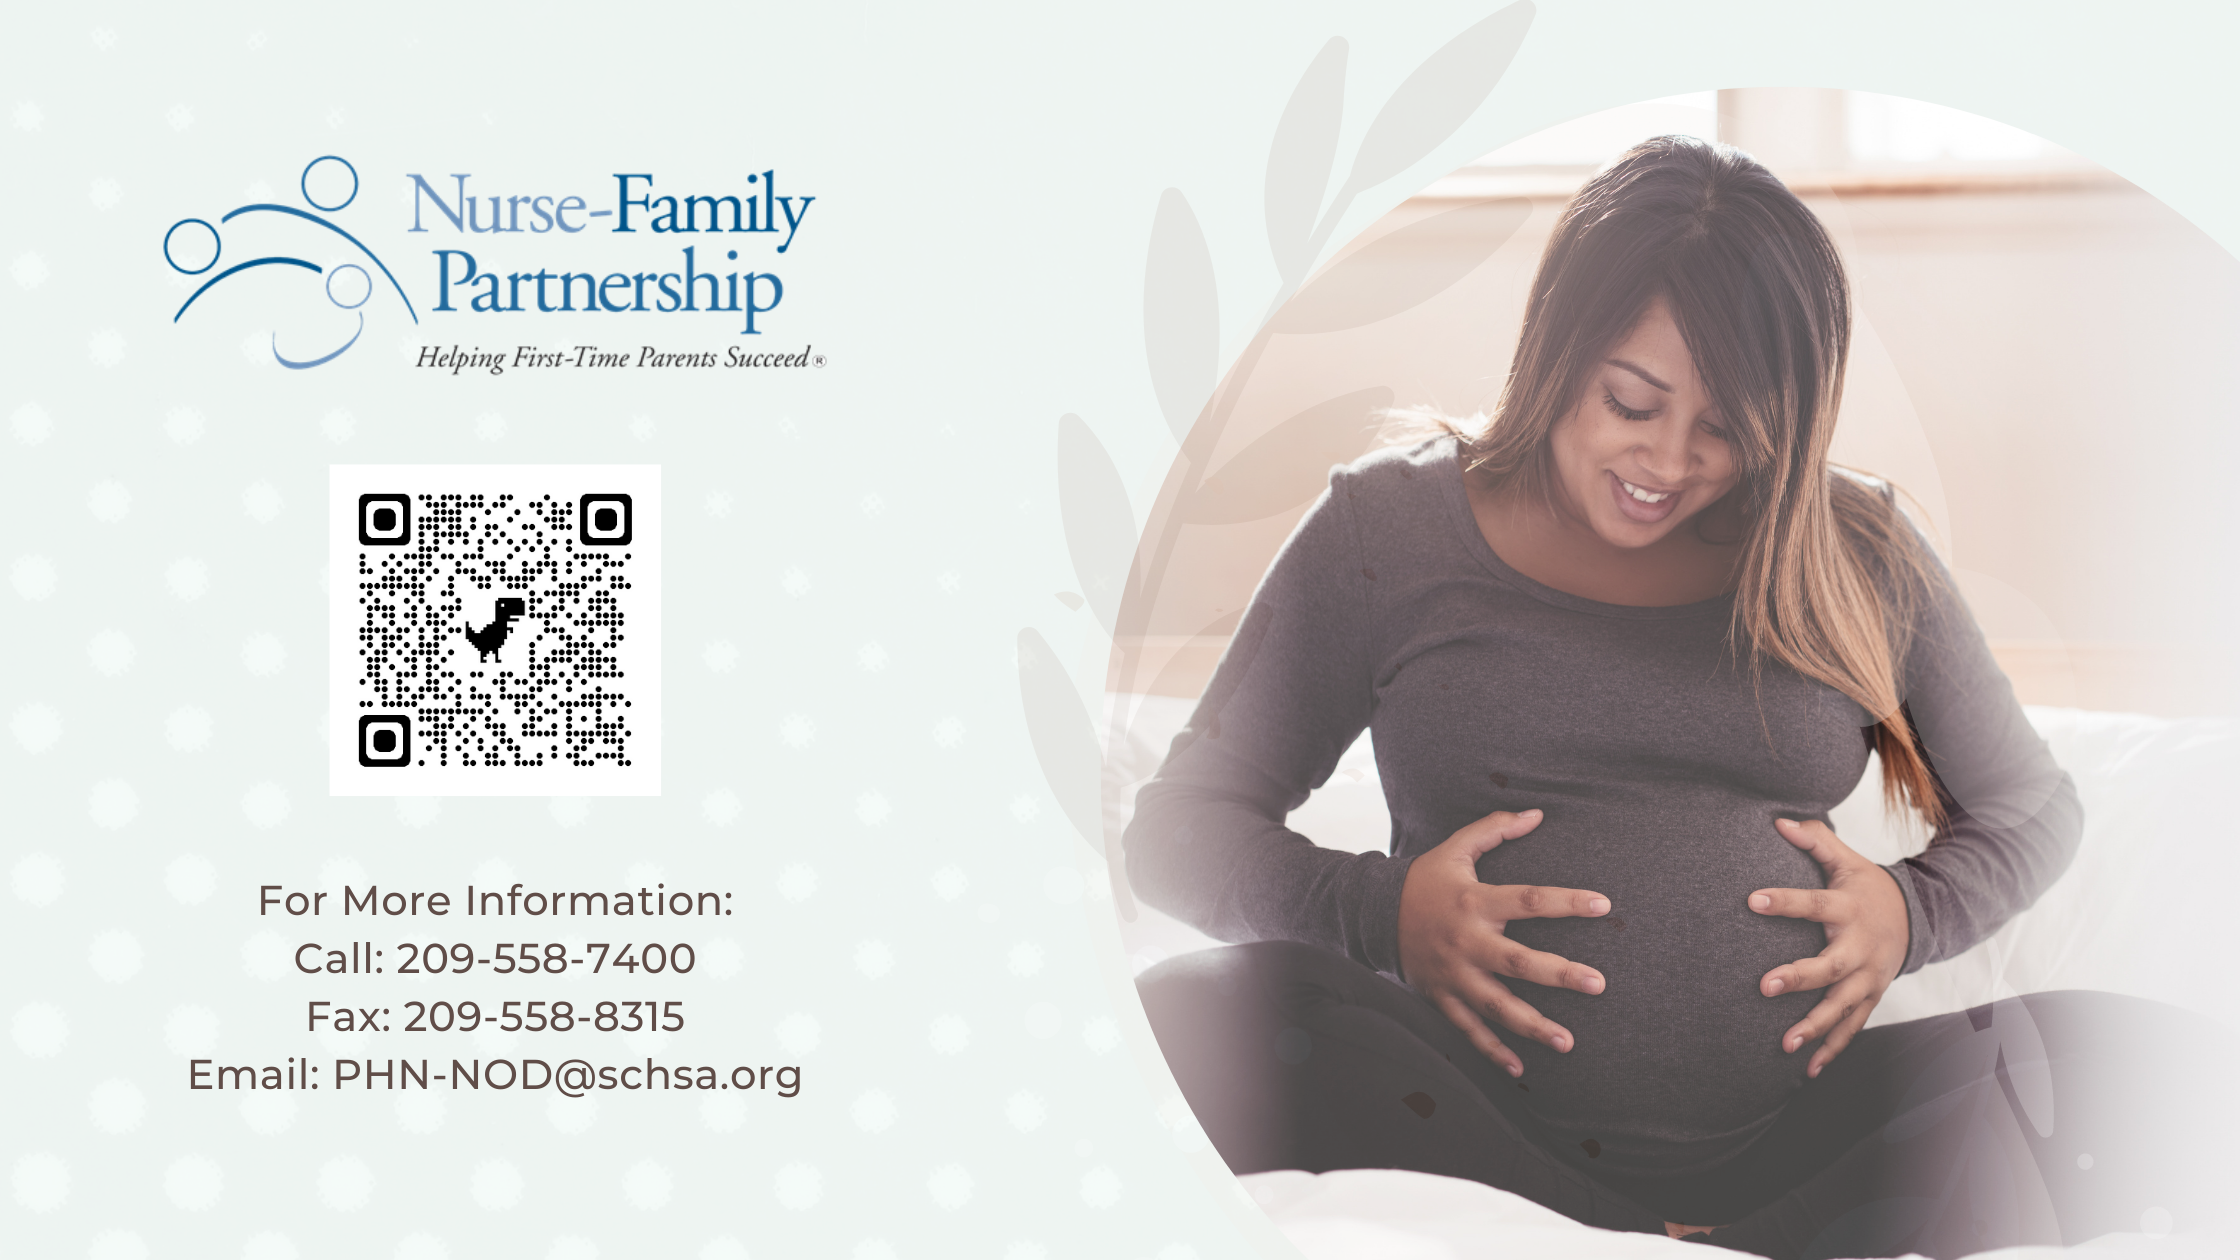 Nurse Family Partnership program's QR code and contact. Call 209-558-7400 or Email PHN-NOD@schsa.org